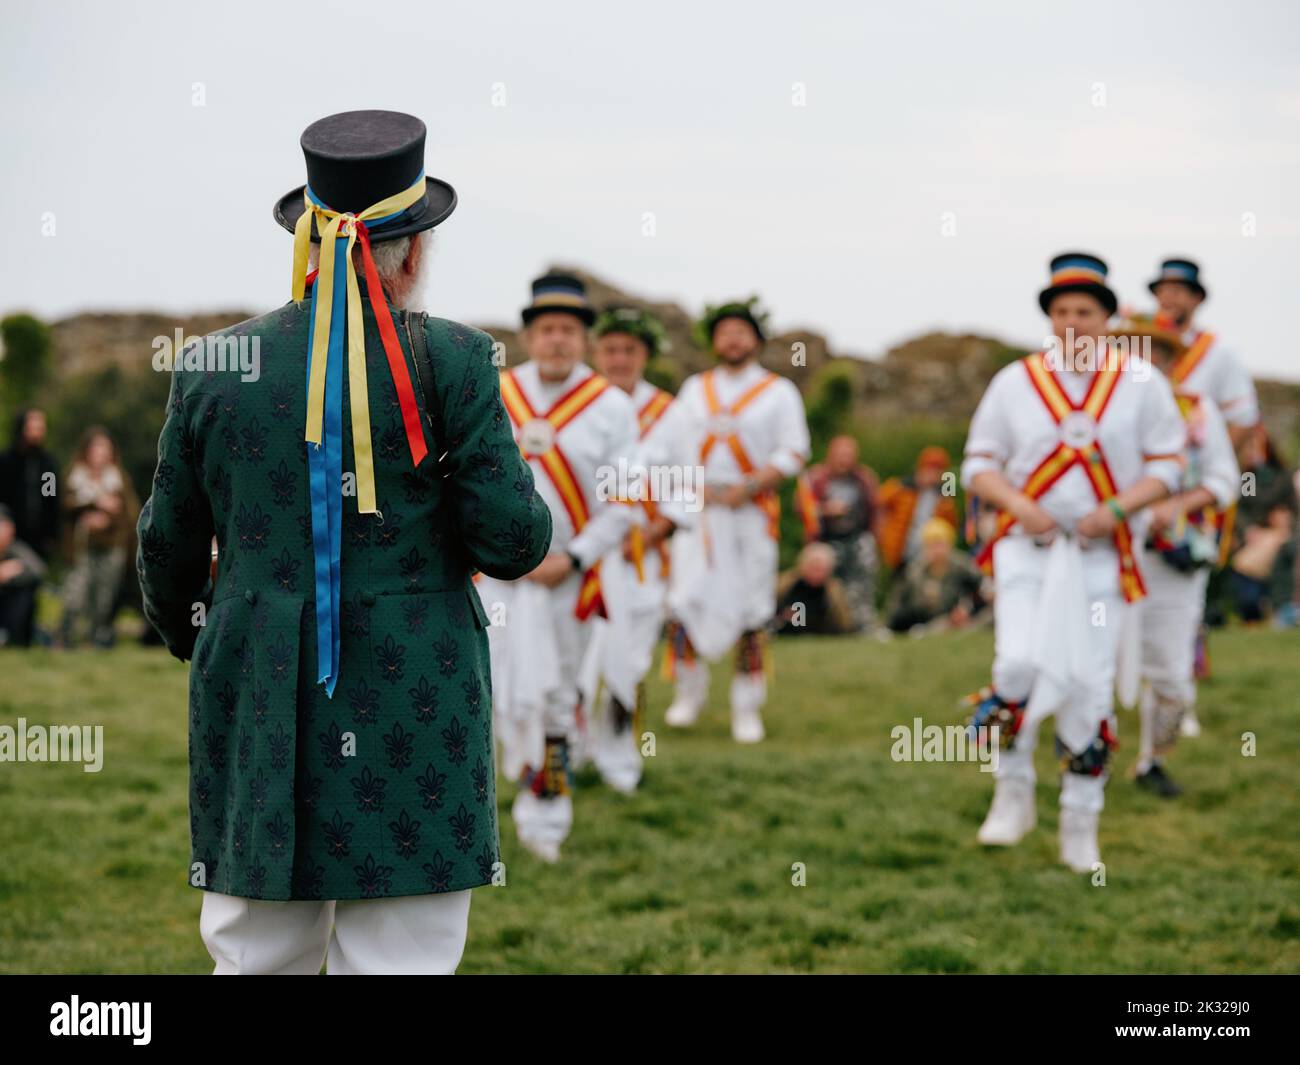 Sunrise morris dancers dancing in the Ladies Parlour West Hill in the Jack in the Green festival May 2022 - Hastings East Sussex England UK Stock Photo